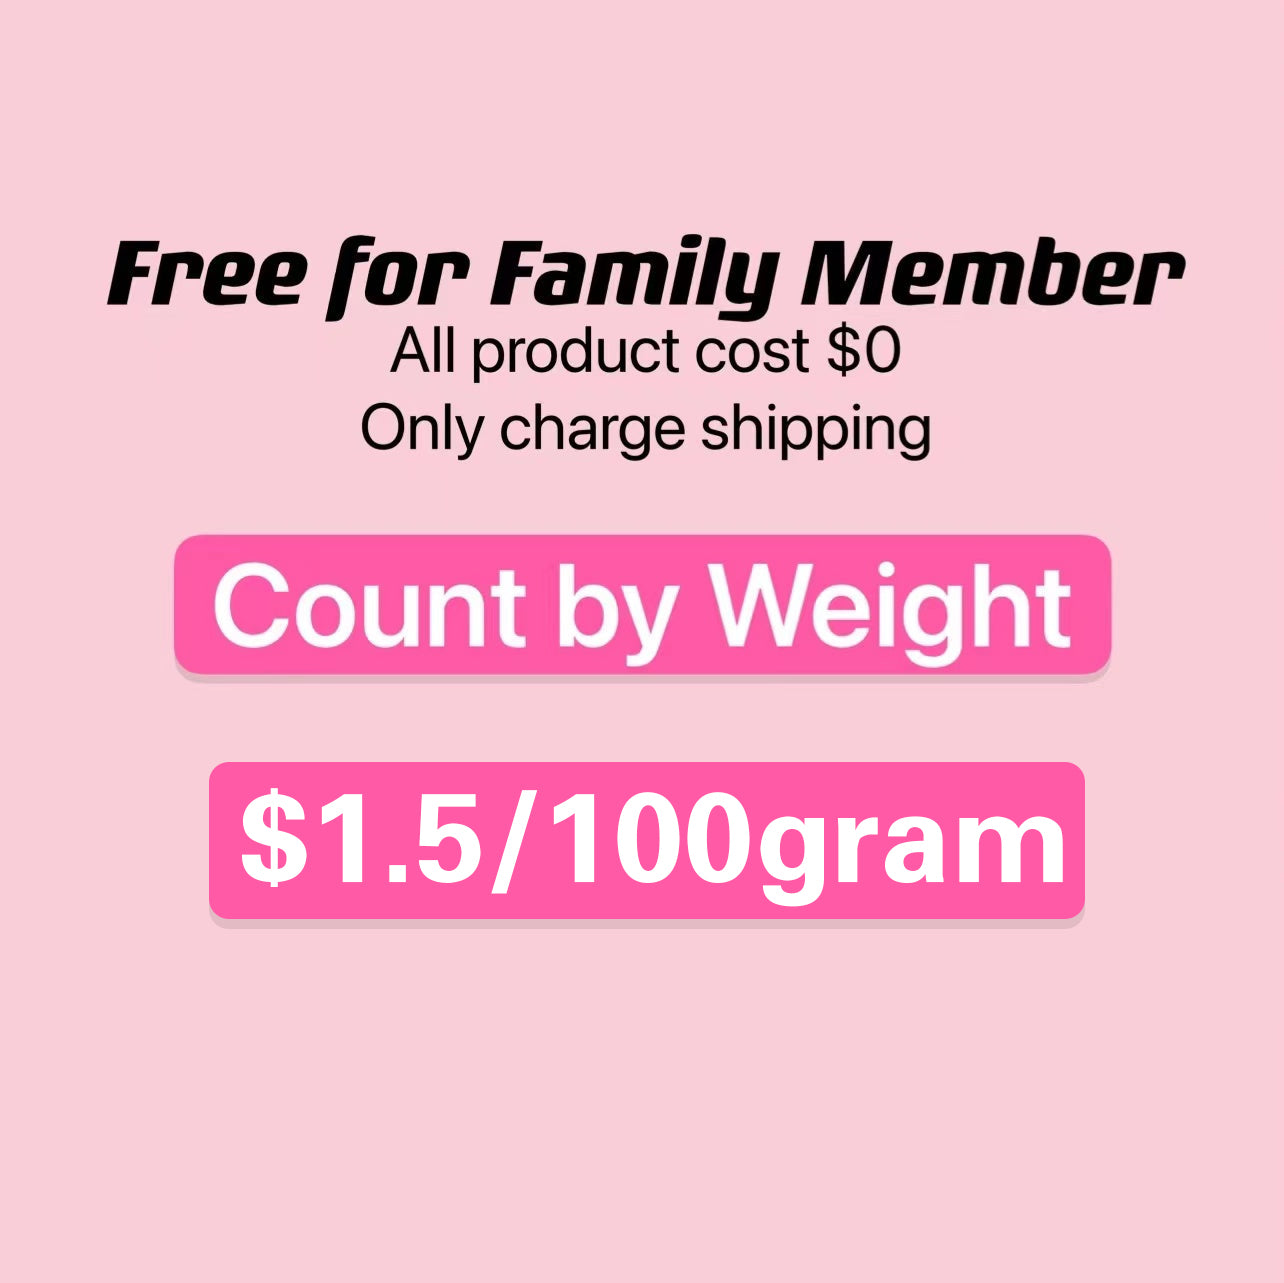 【$1.5/100gram】Count by weight, only charge shipping